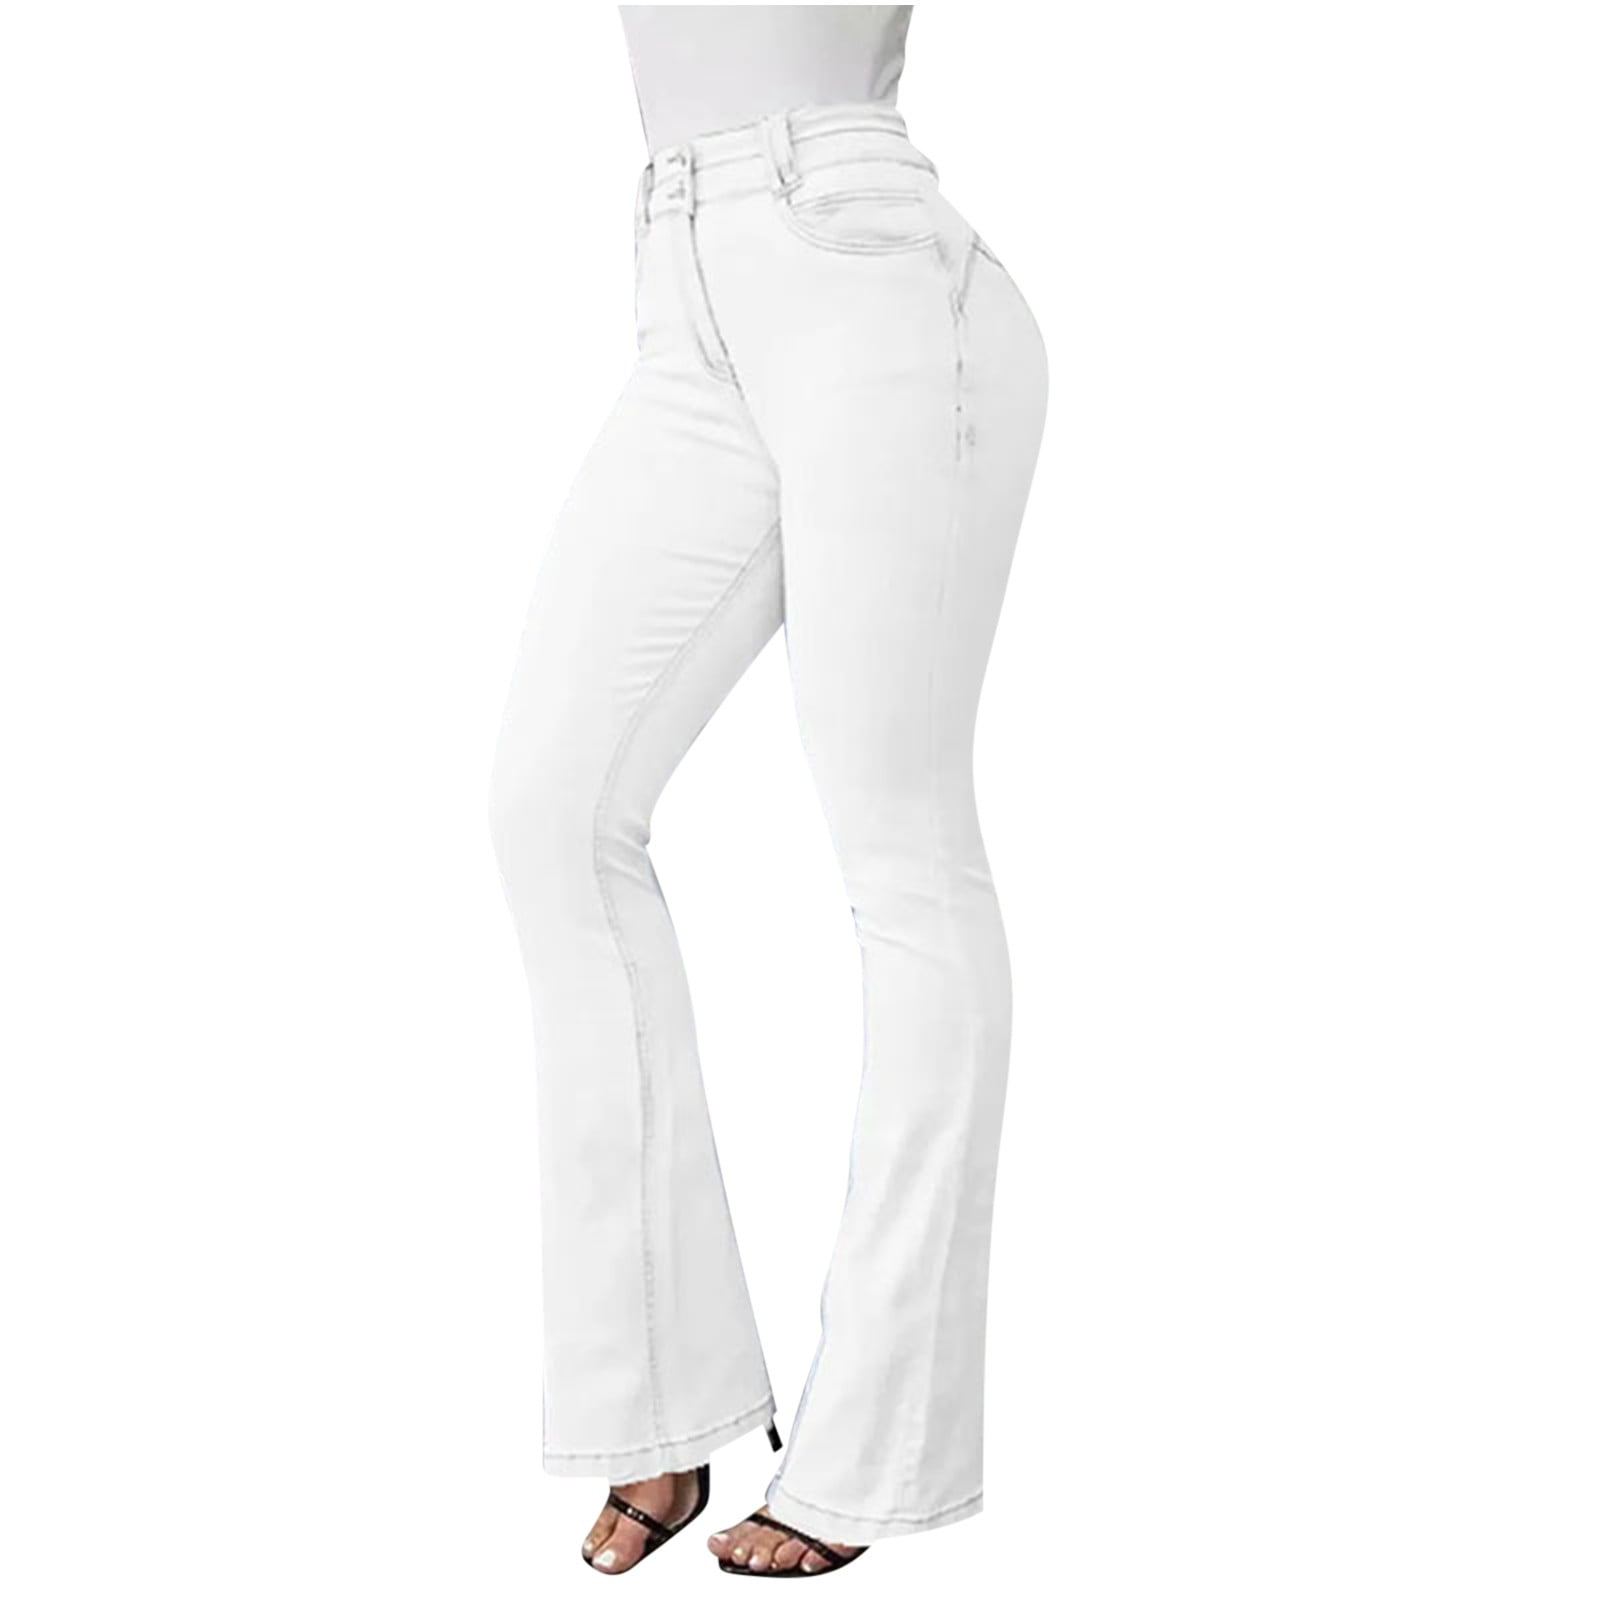 APEXFWDT Bell Bottom Jeans for Women Ripped High Waisted Classic Flared ...